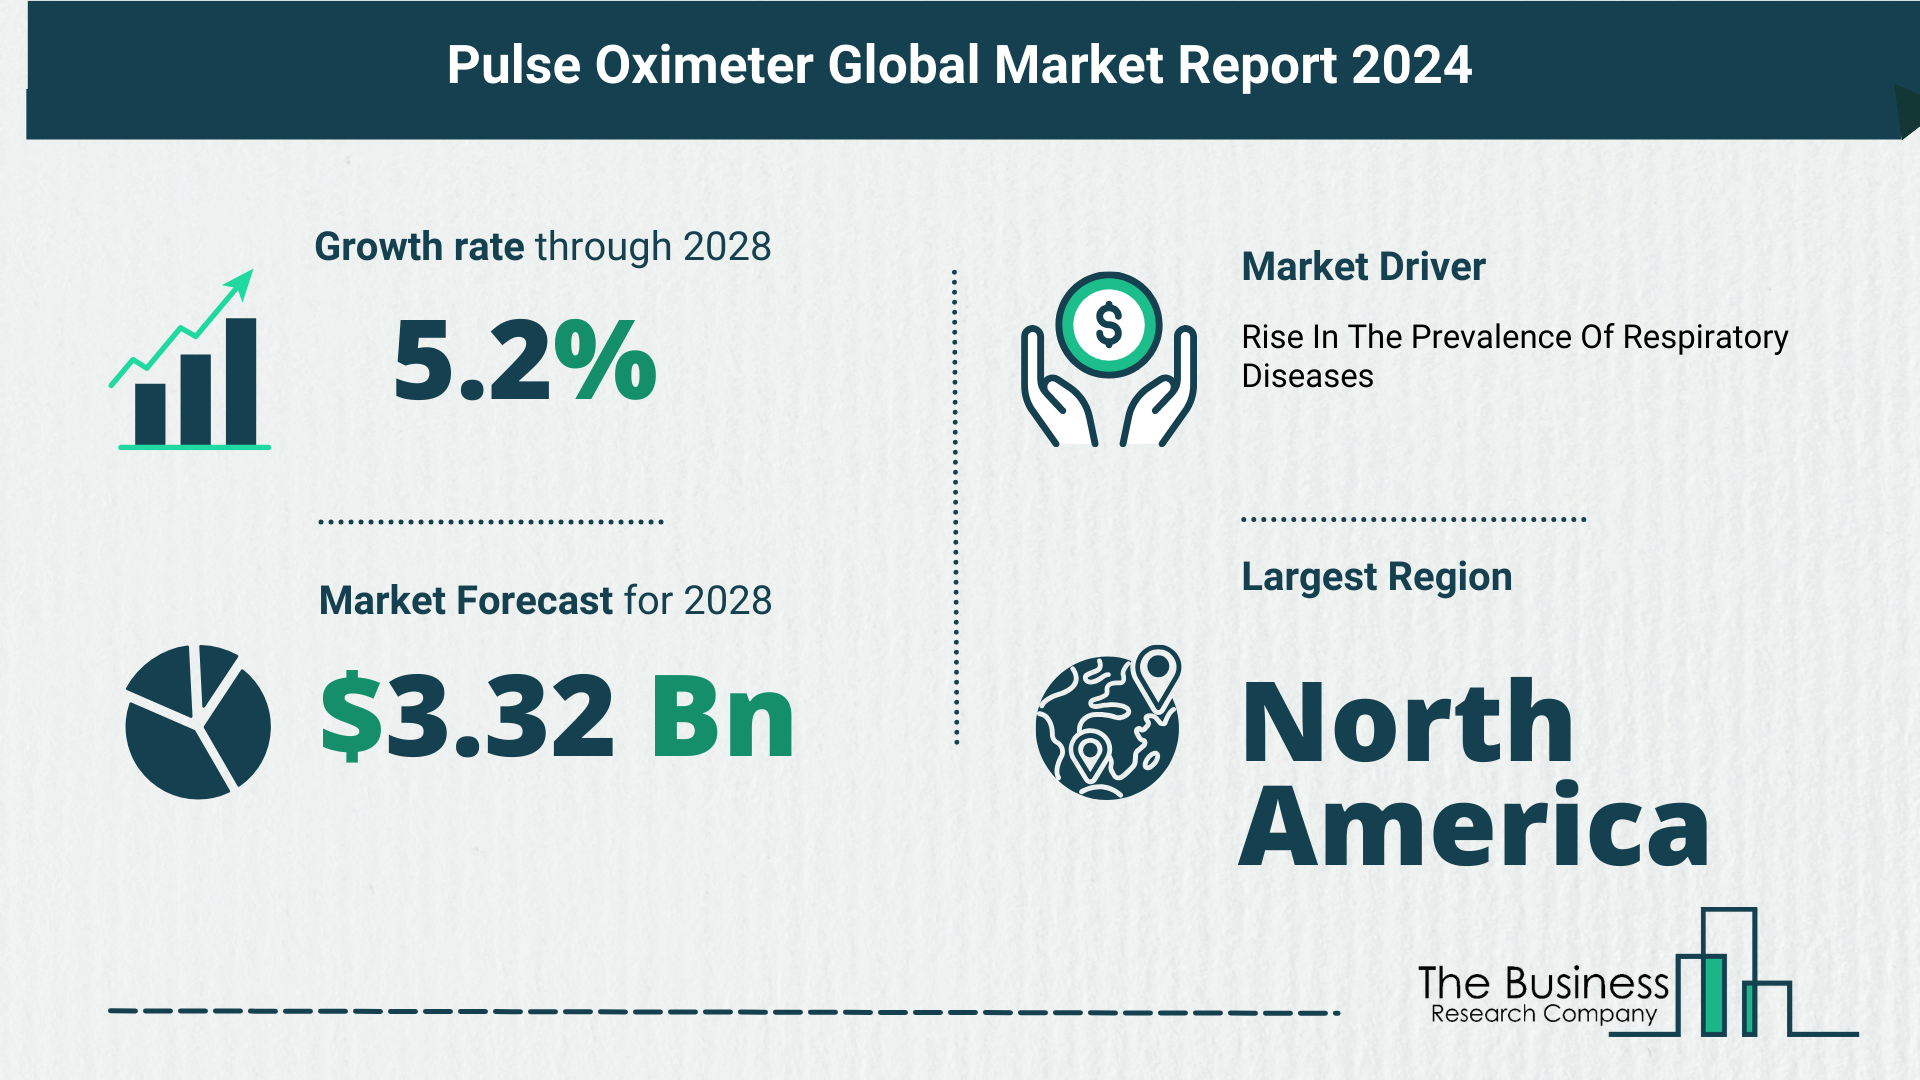 Top 5 Insights From The Pulse Oximeter Market Report 2024